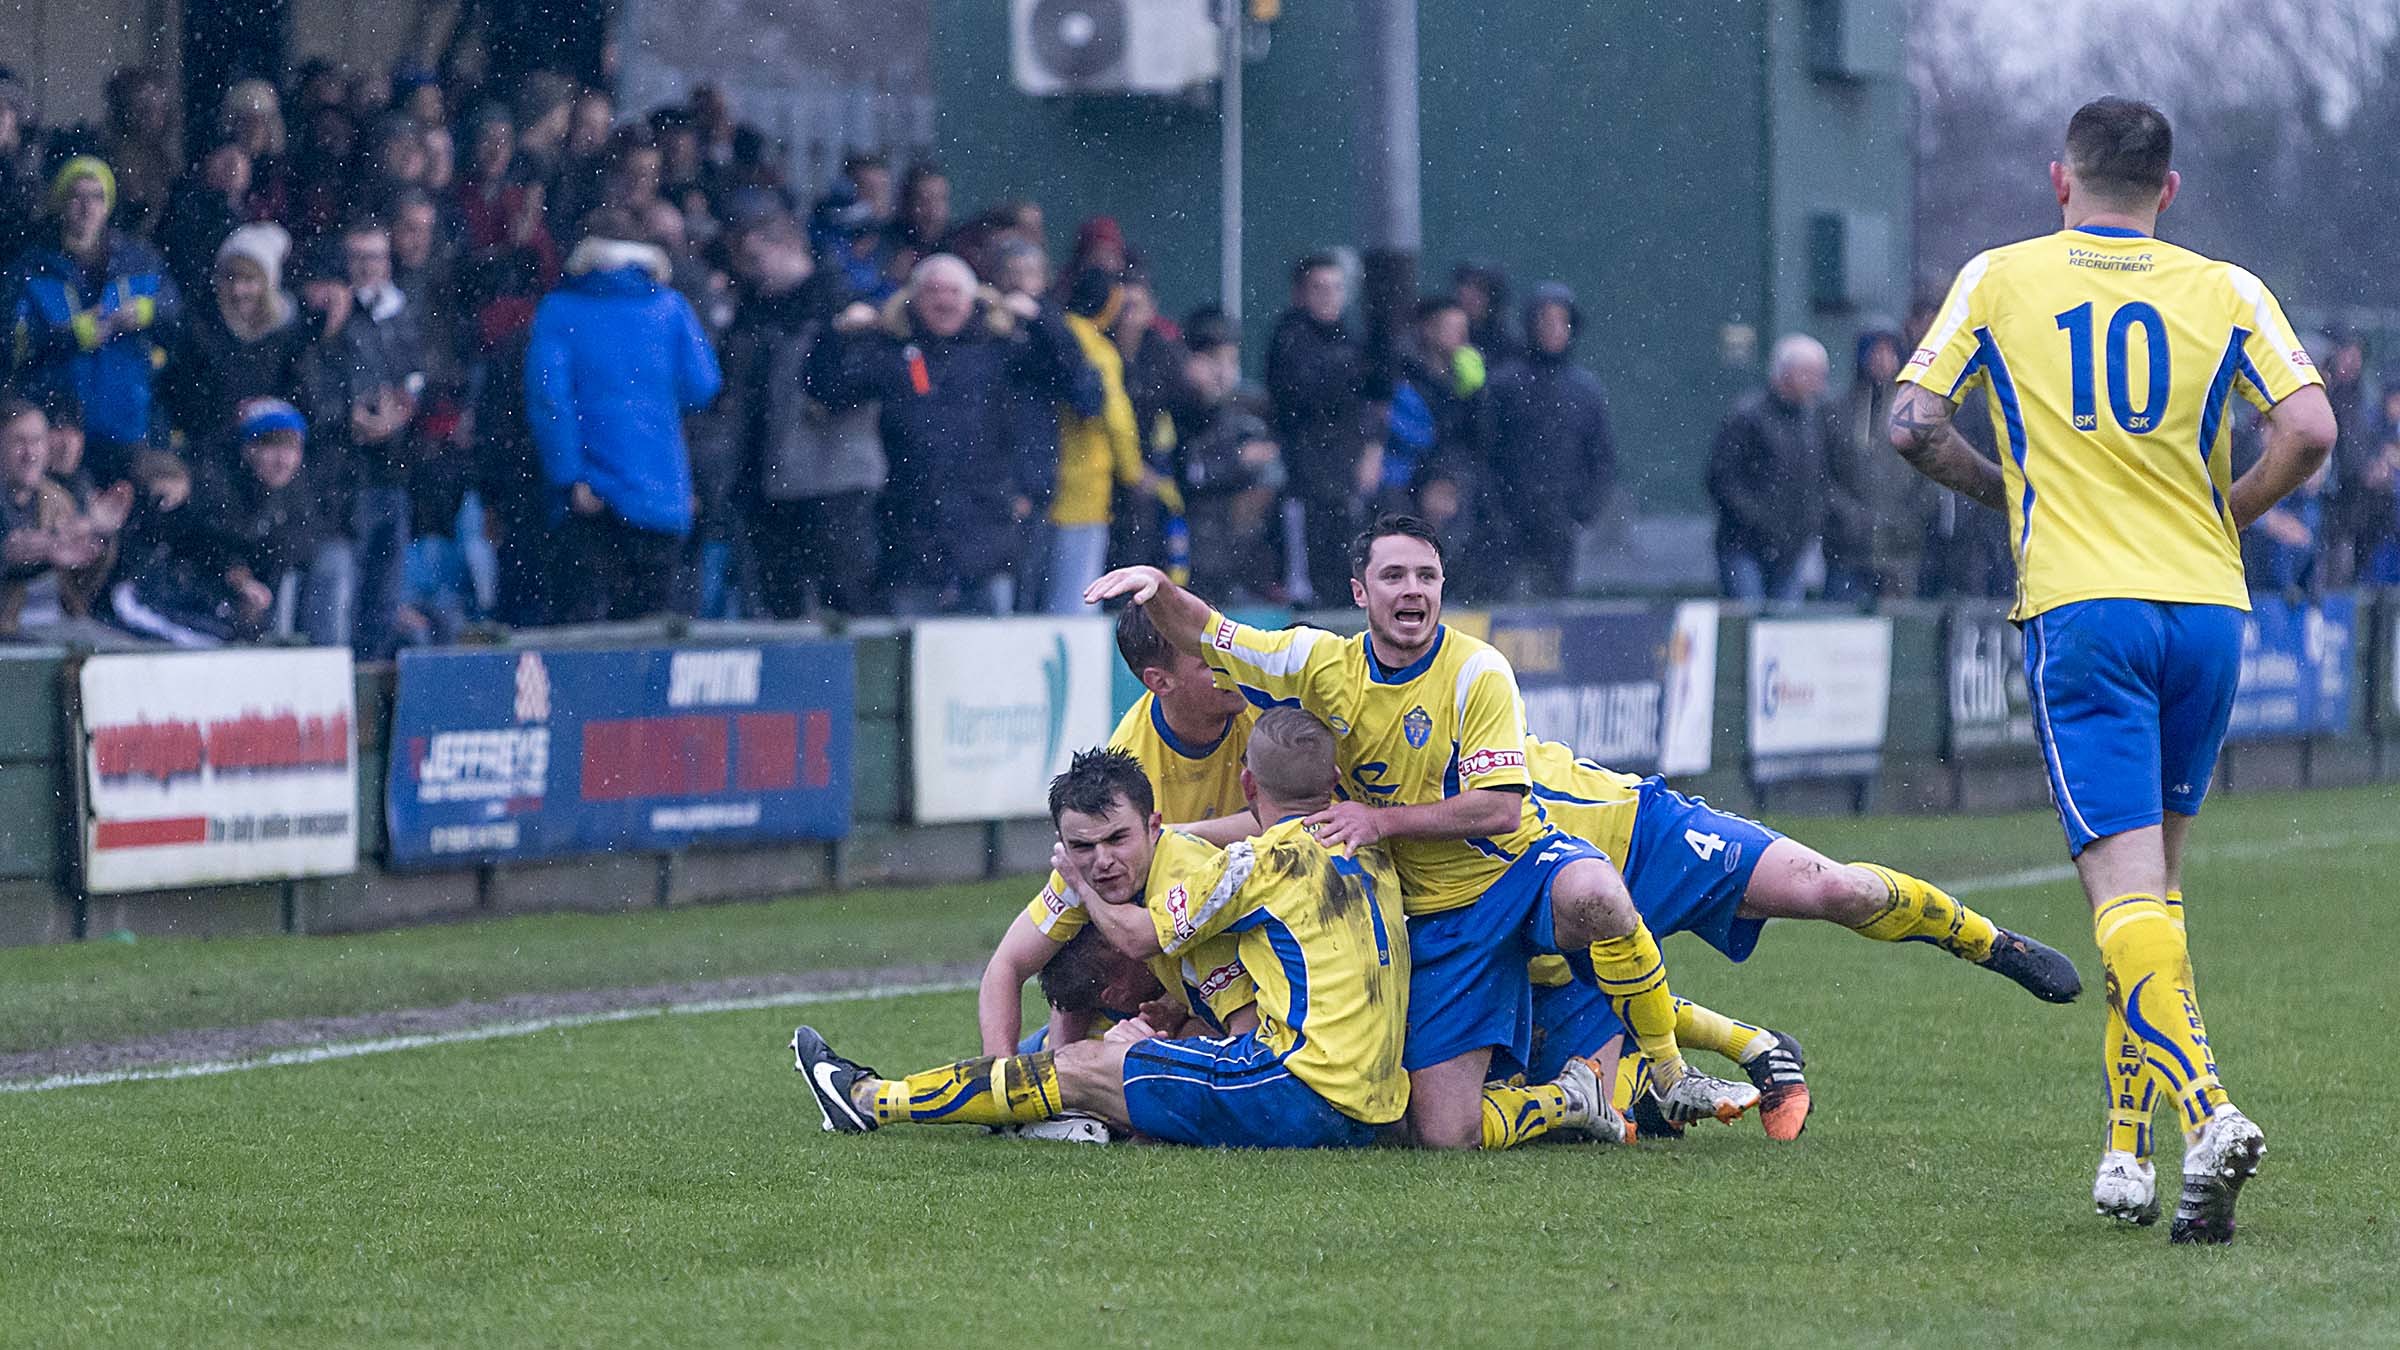 More than 1,000 people watched Yellows beat Northwich Victoria 4-2 in January 2016. Picture by John Hopkins